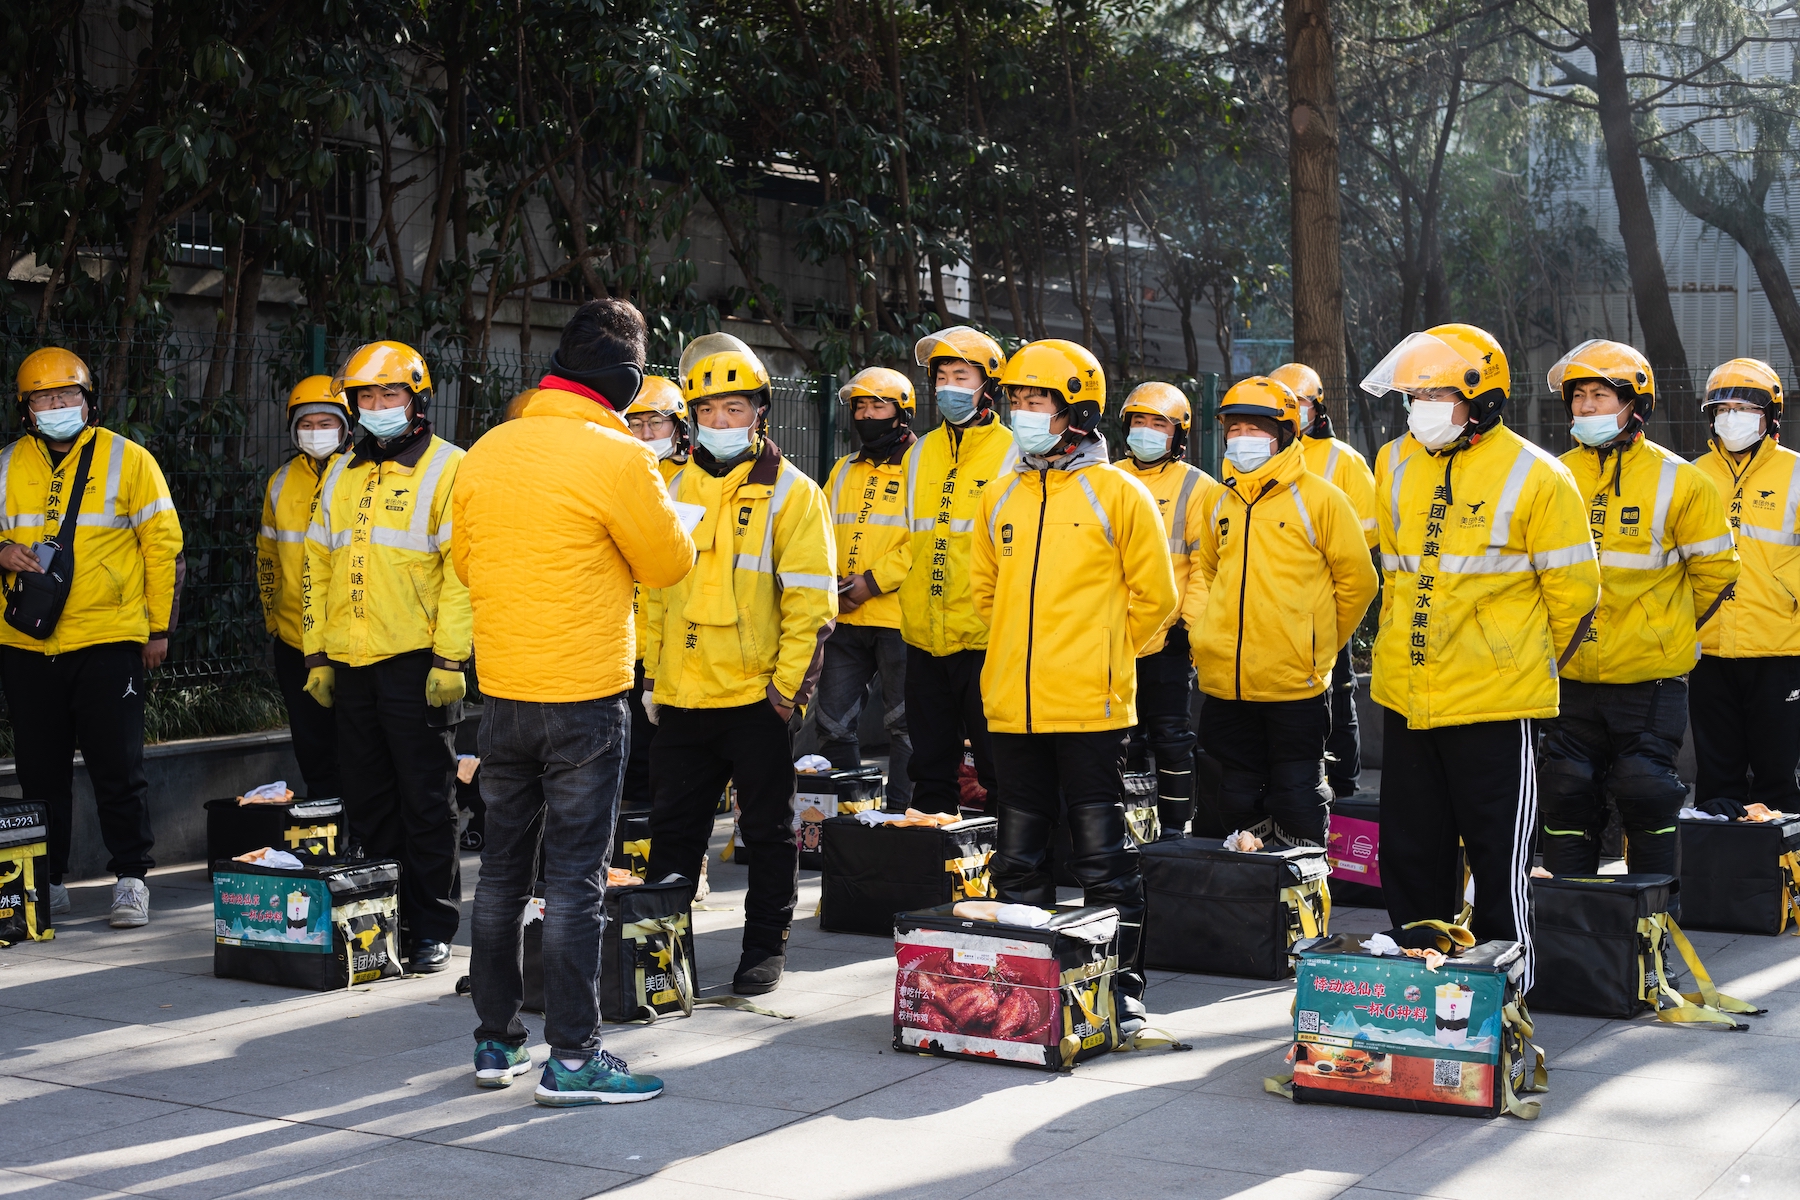 Meituan food delivery workers gather at their substation before work to participate in morning exercises and receive instructions